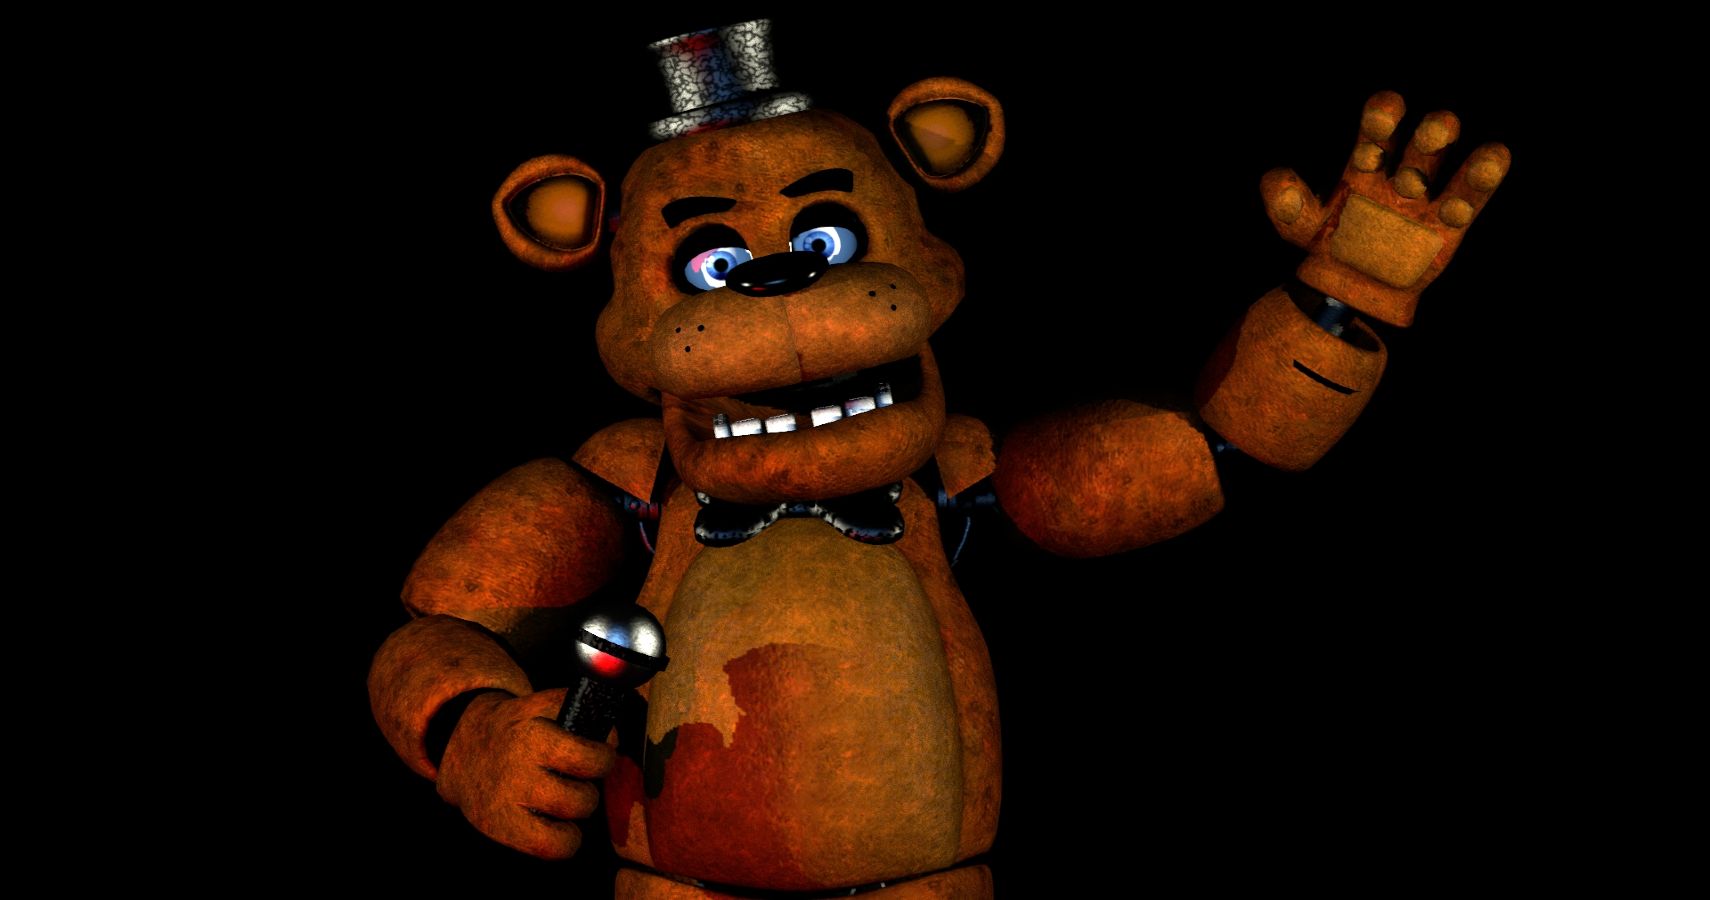 Five Nights At Freddy's: 10 Things You Didn't Know About Freddy Fazbear's Pizza